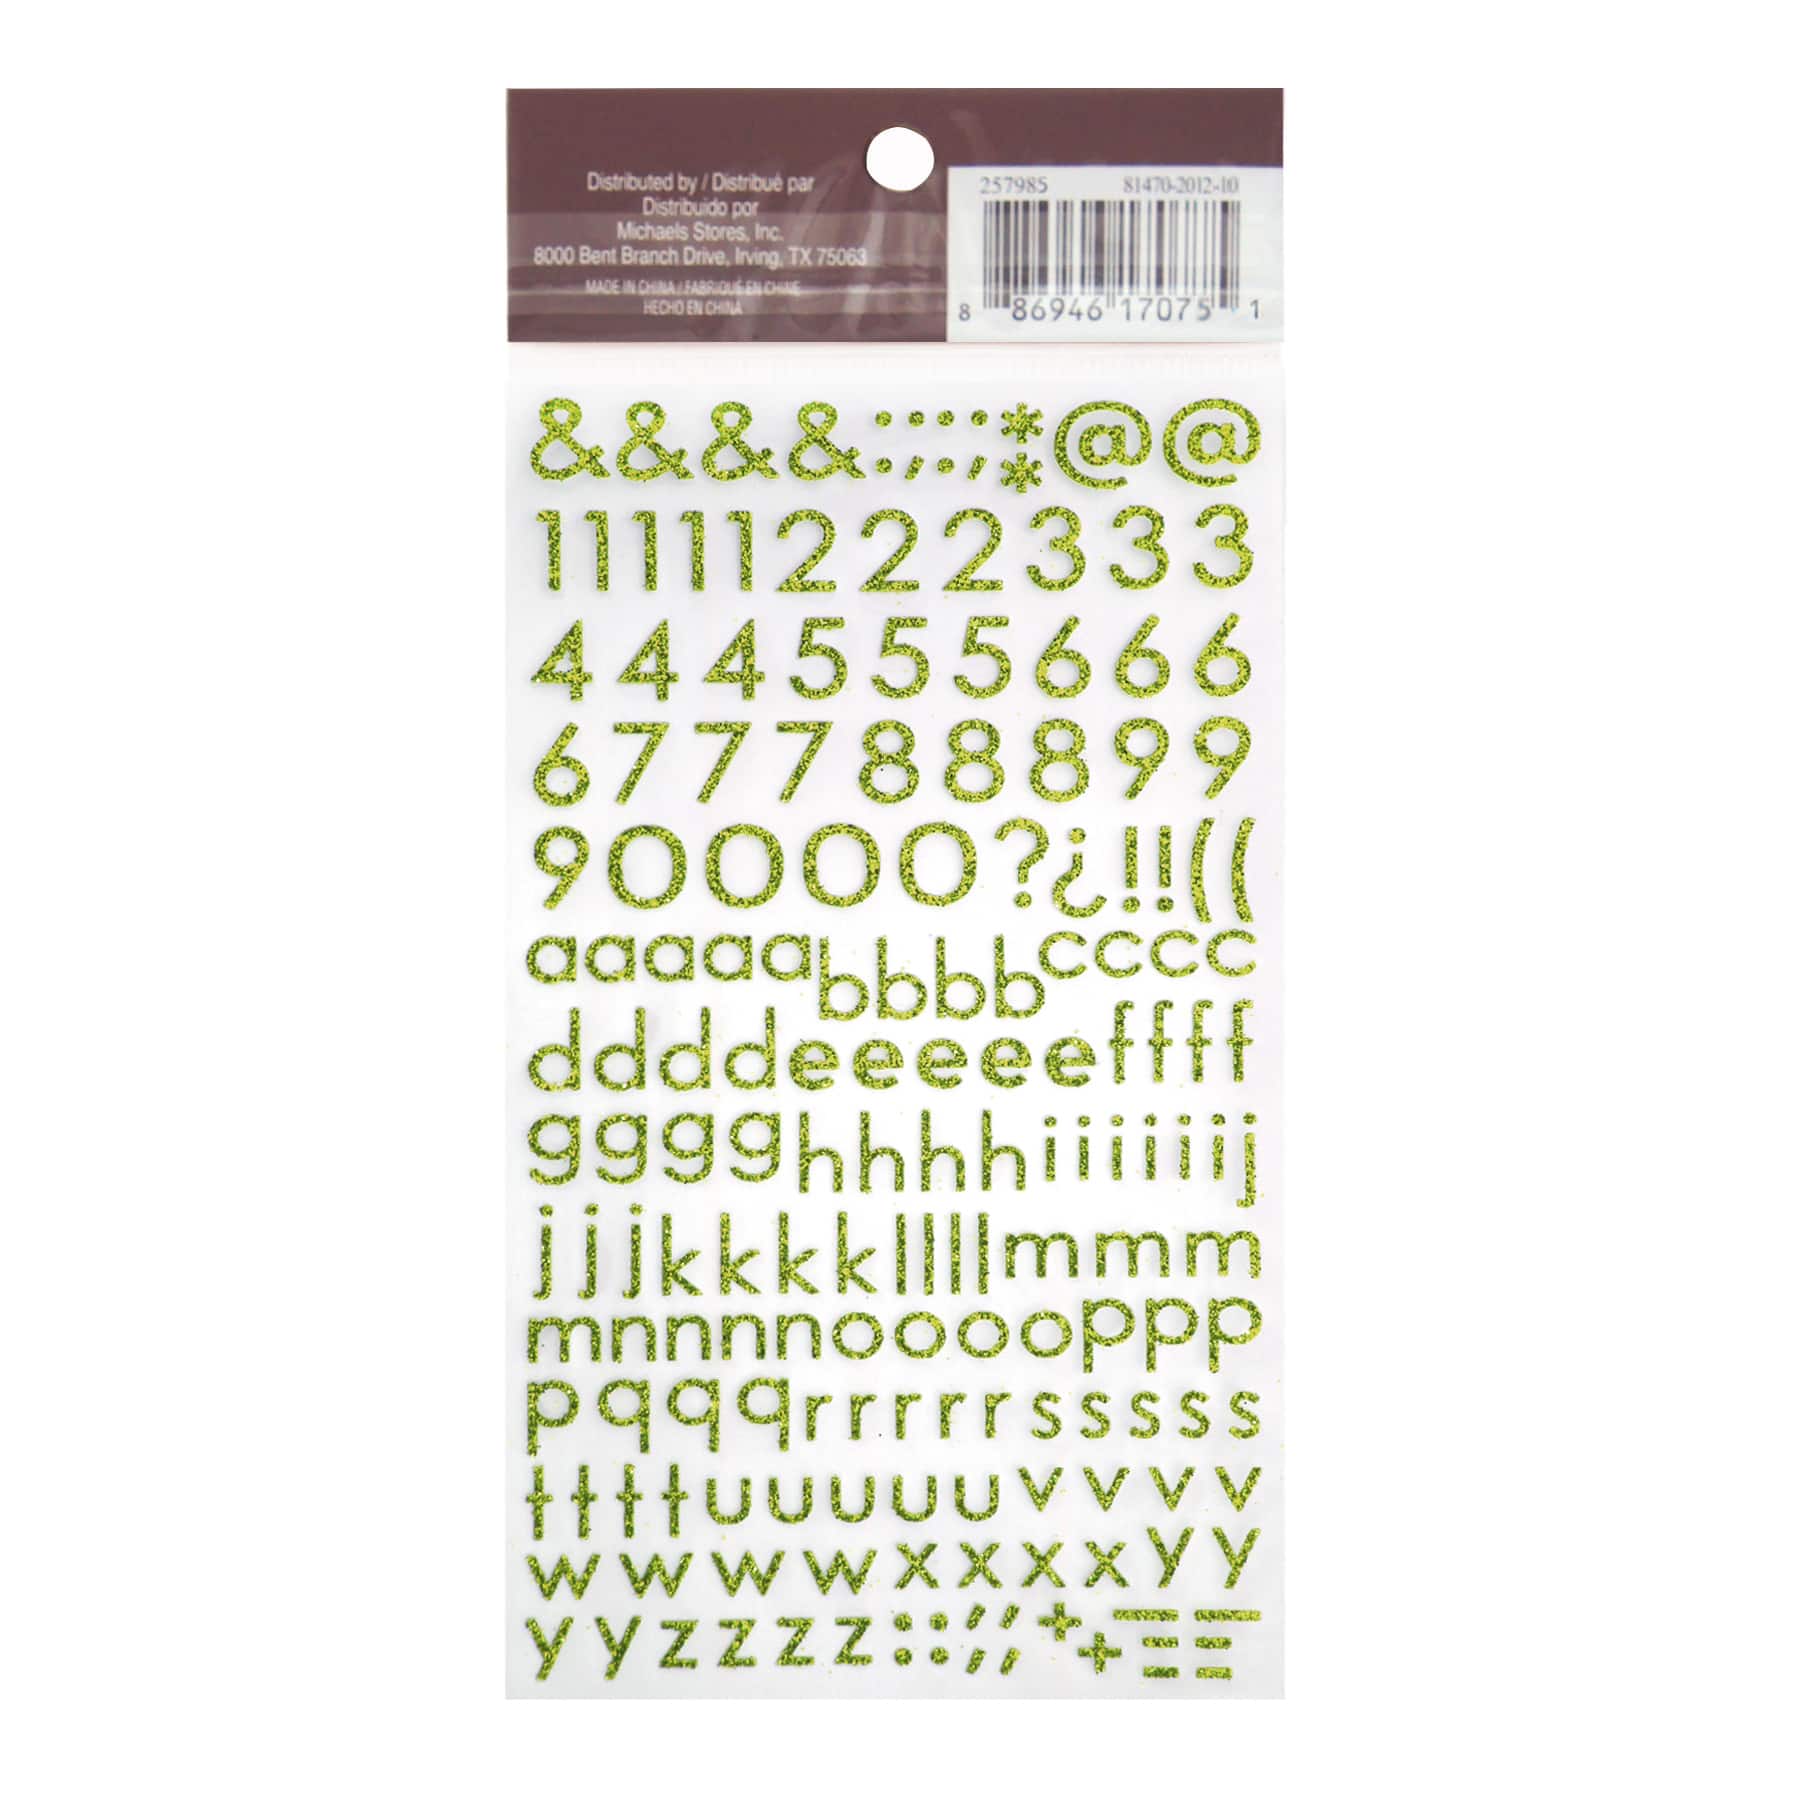 Recollections Block Alphabet & Number Stickers - Each